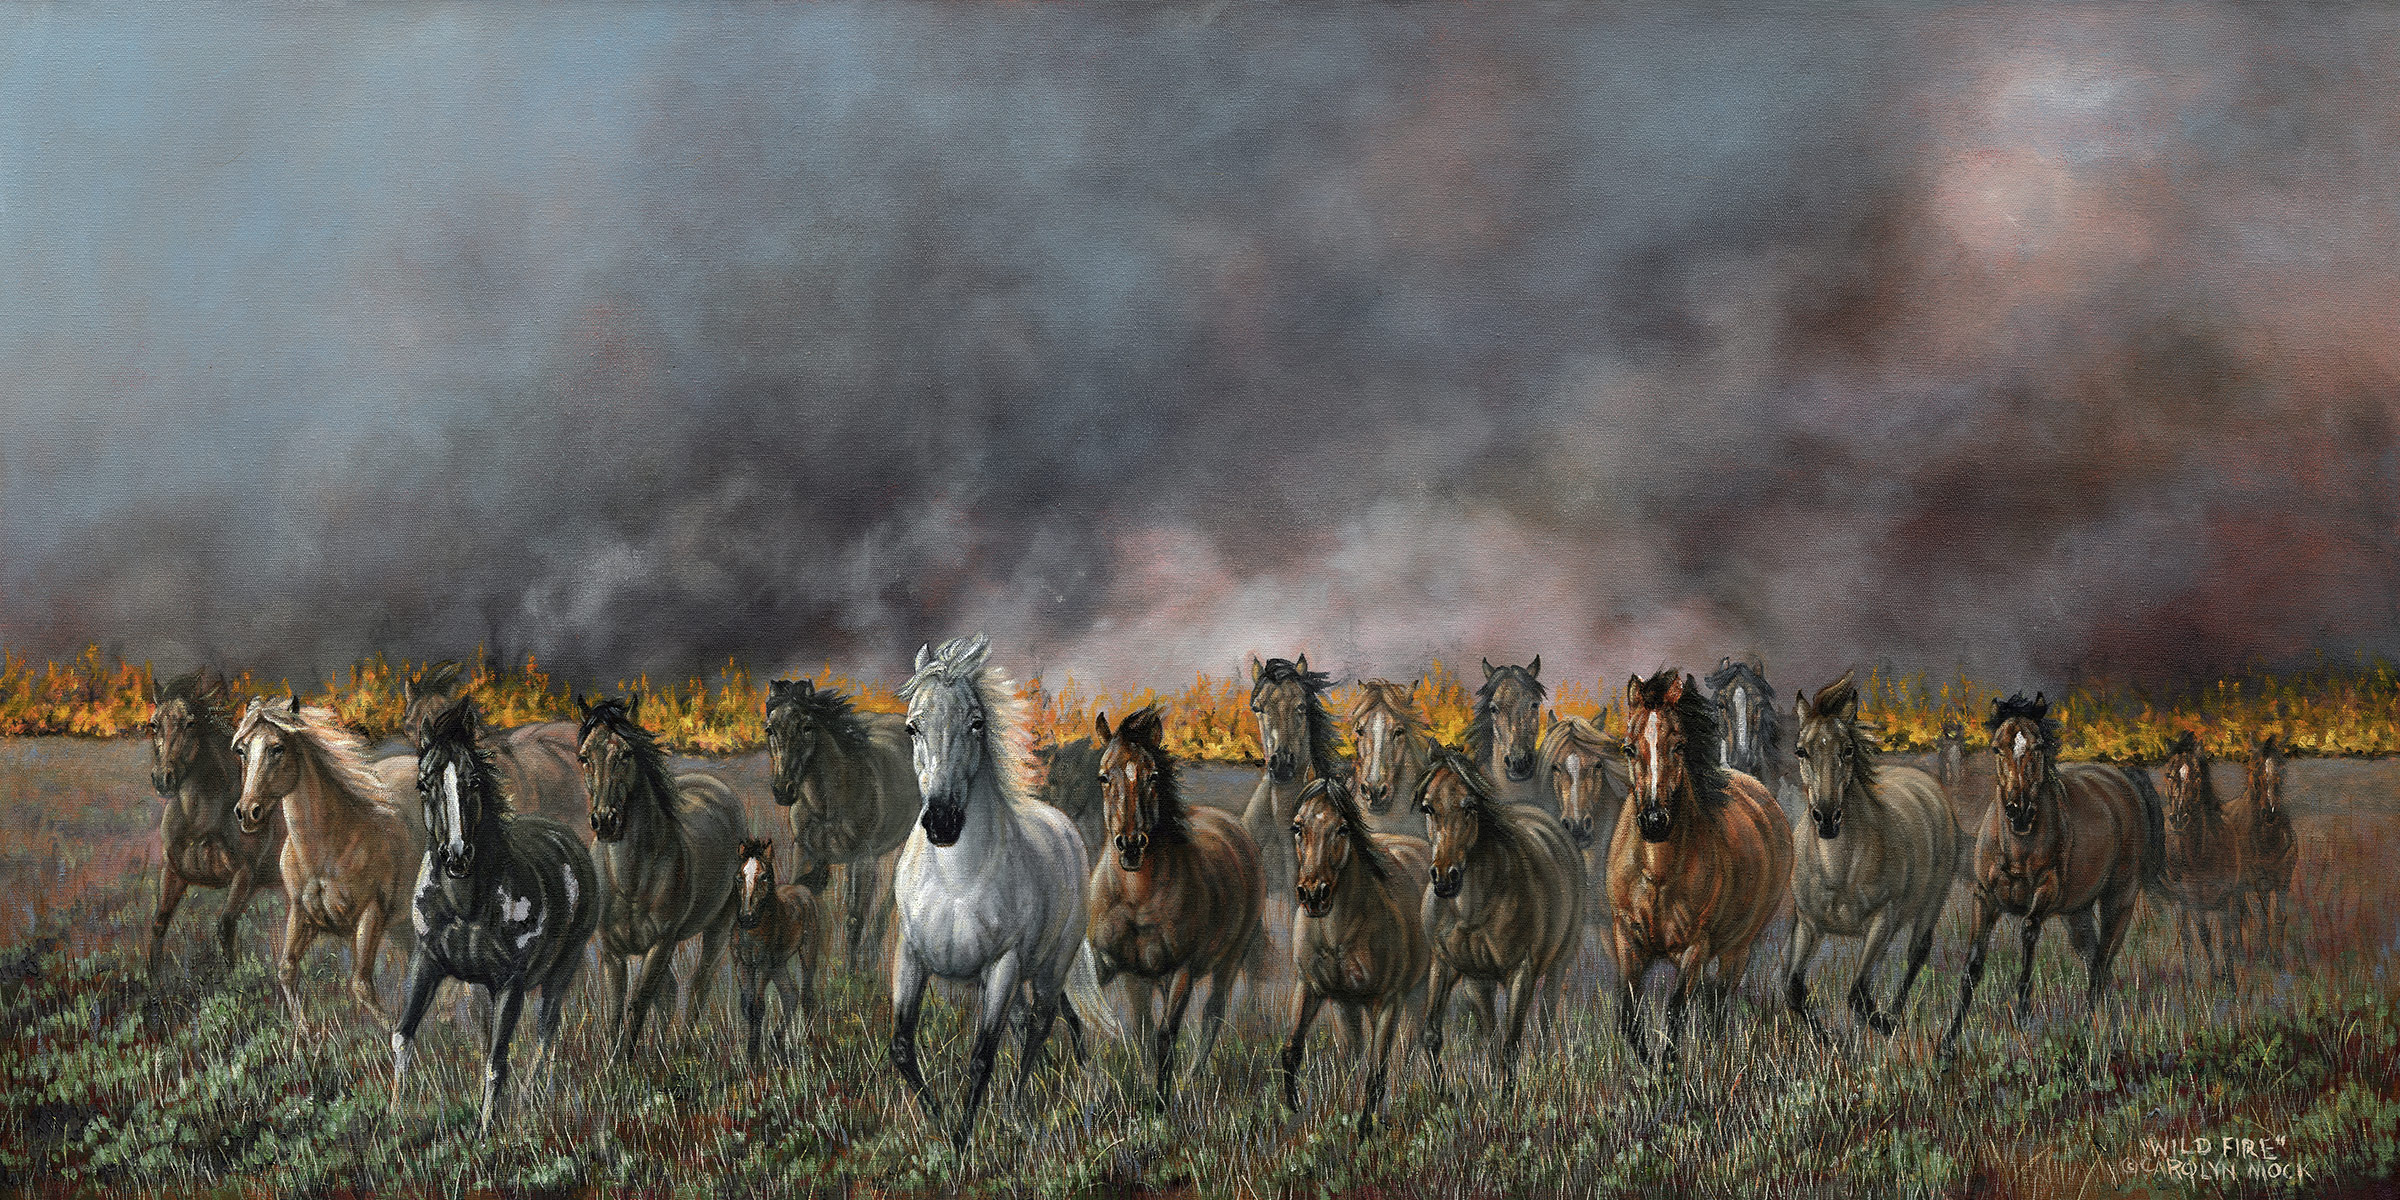 Horses run as the field behind them is consumed by fire